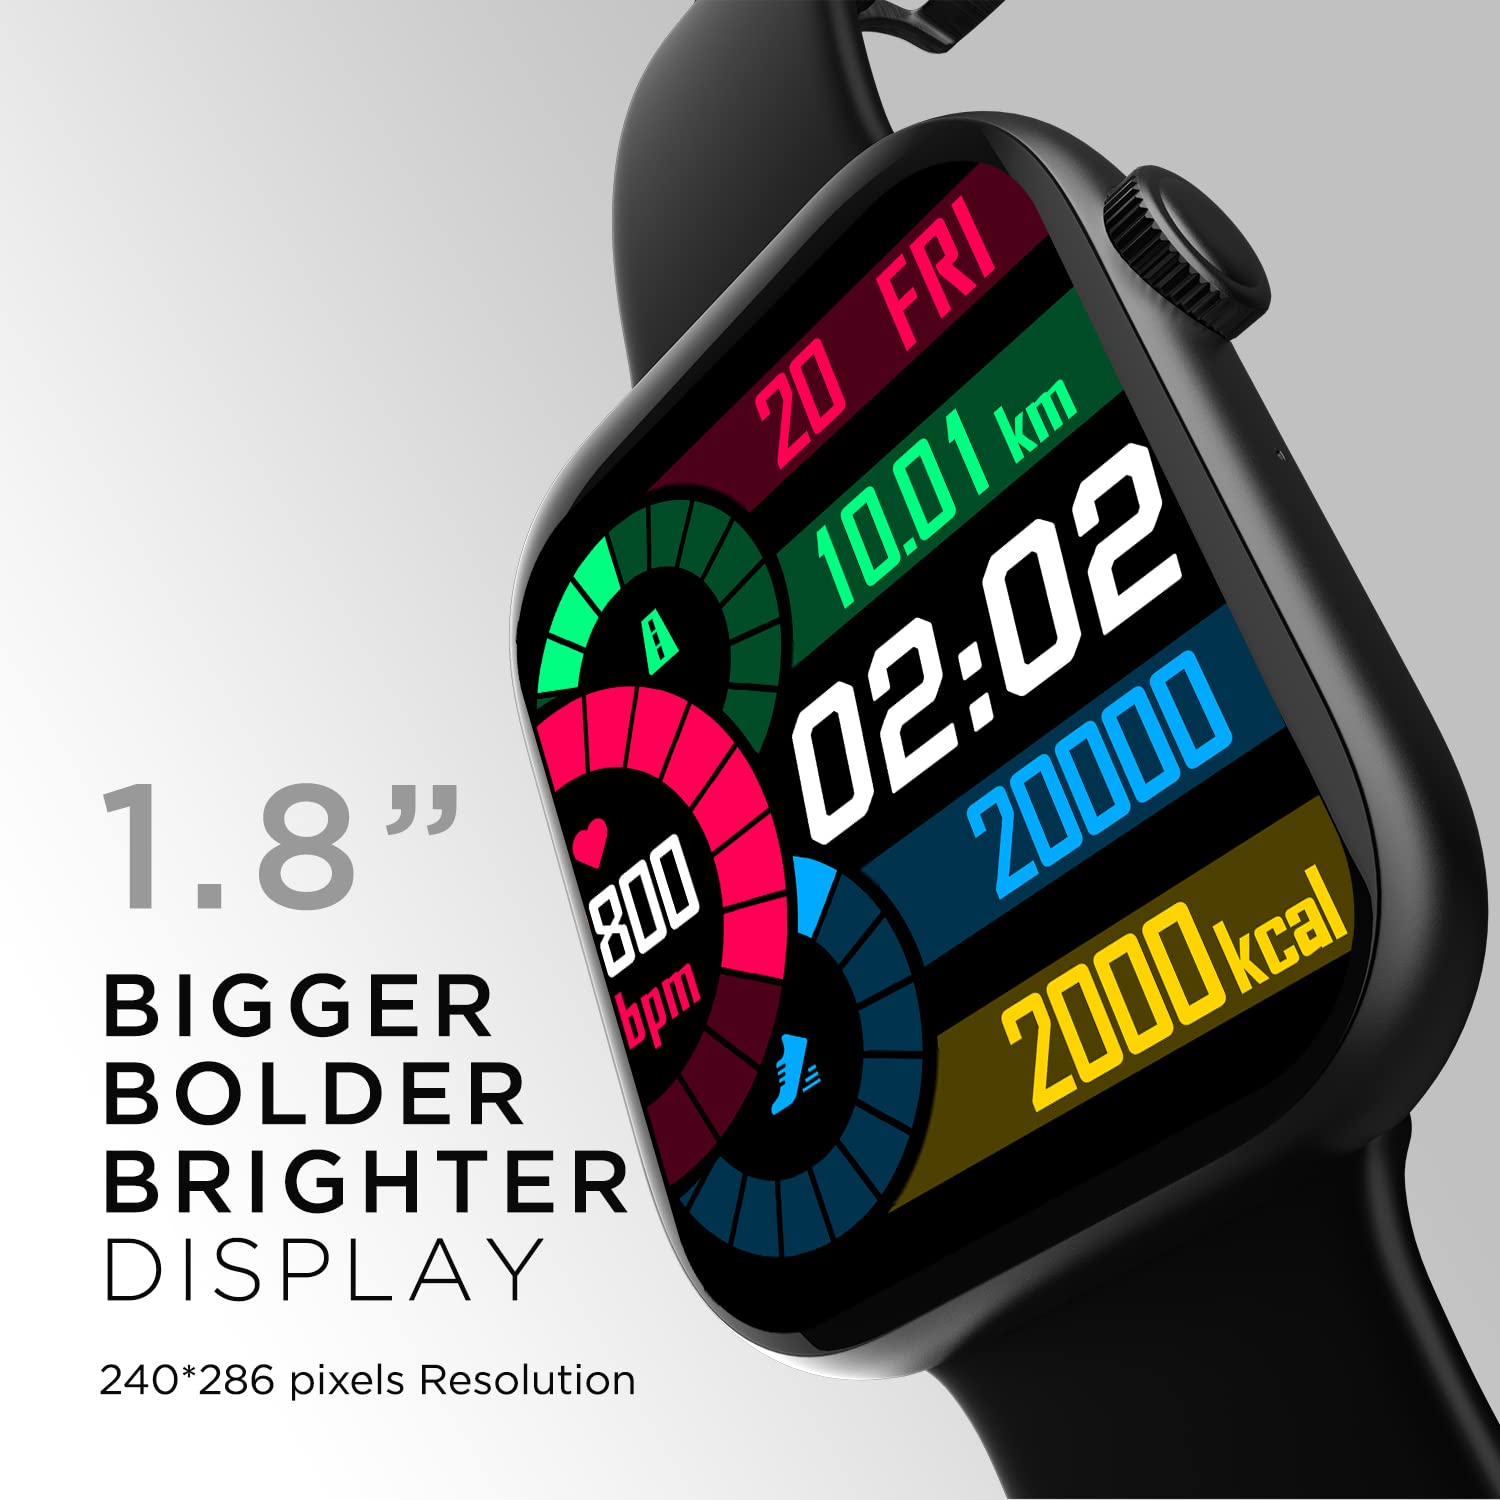 Fire-Boltt Ring 3 Smartwatch With Bluetooth Calling Support Launched In  India: All Details - Pragativadi